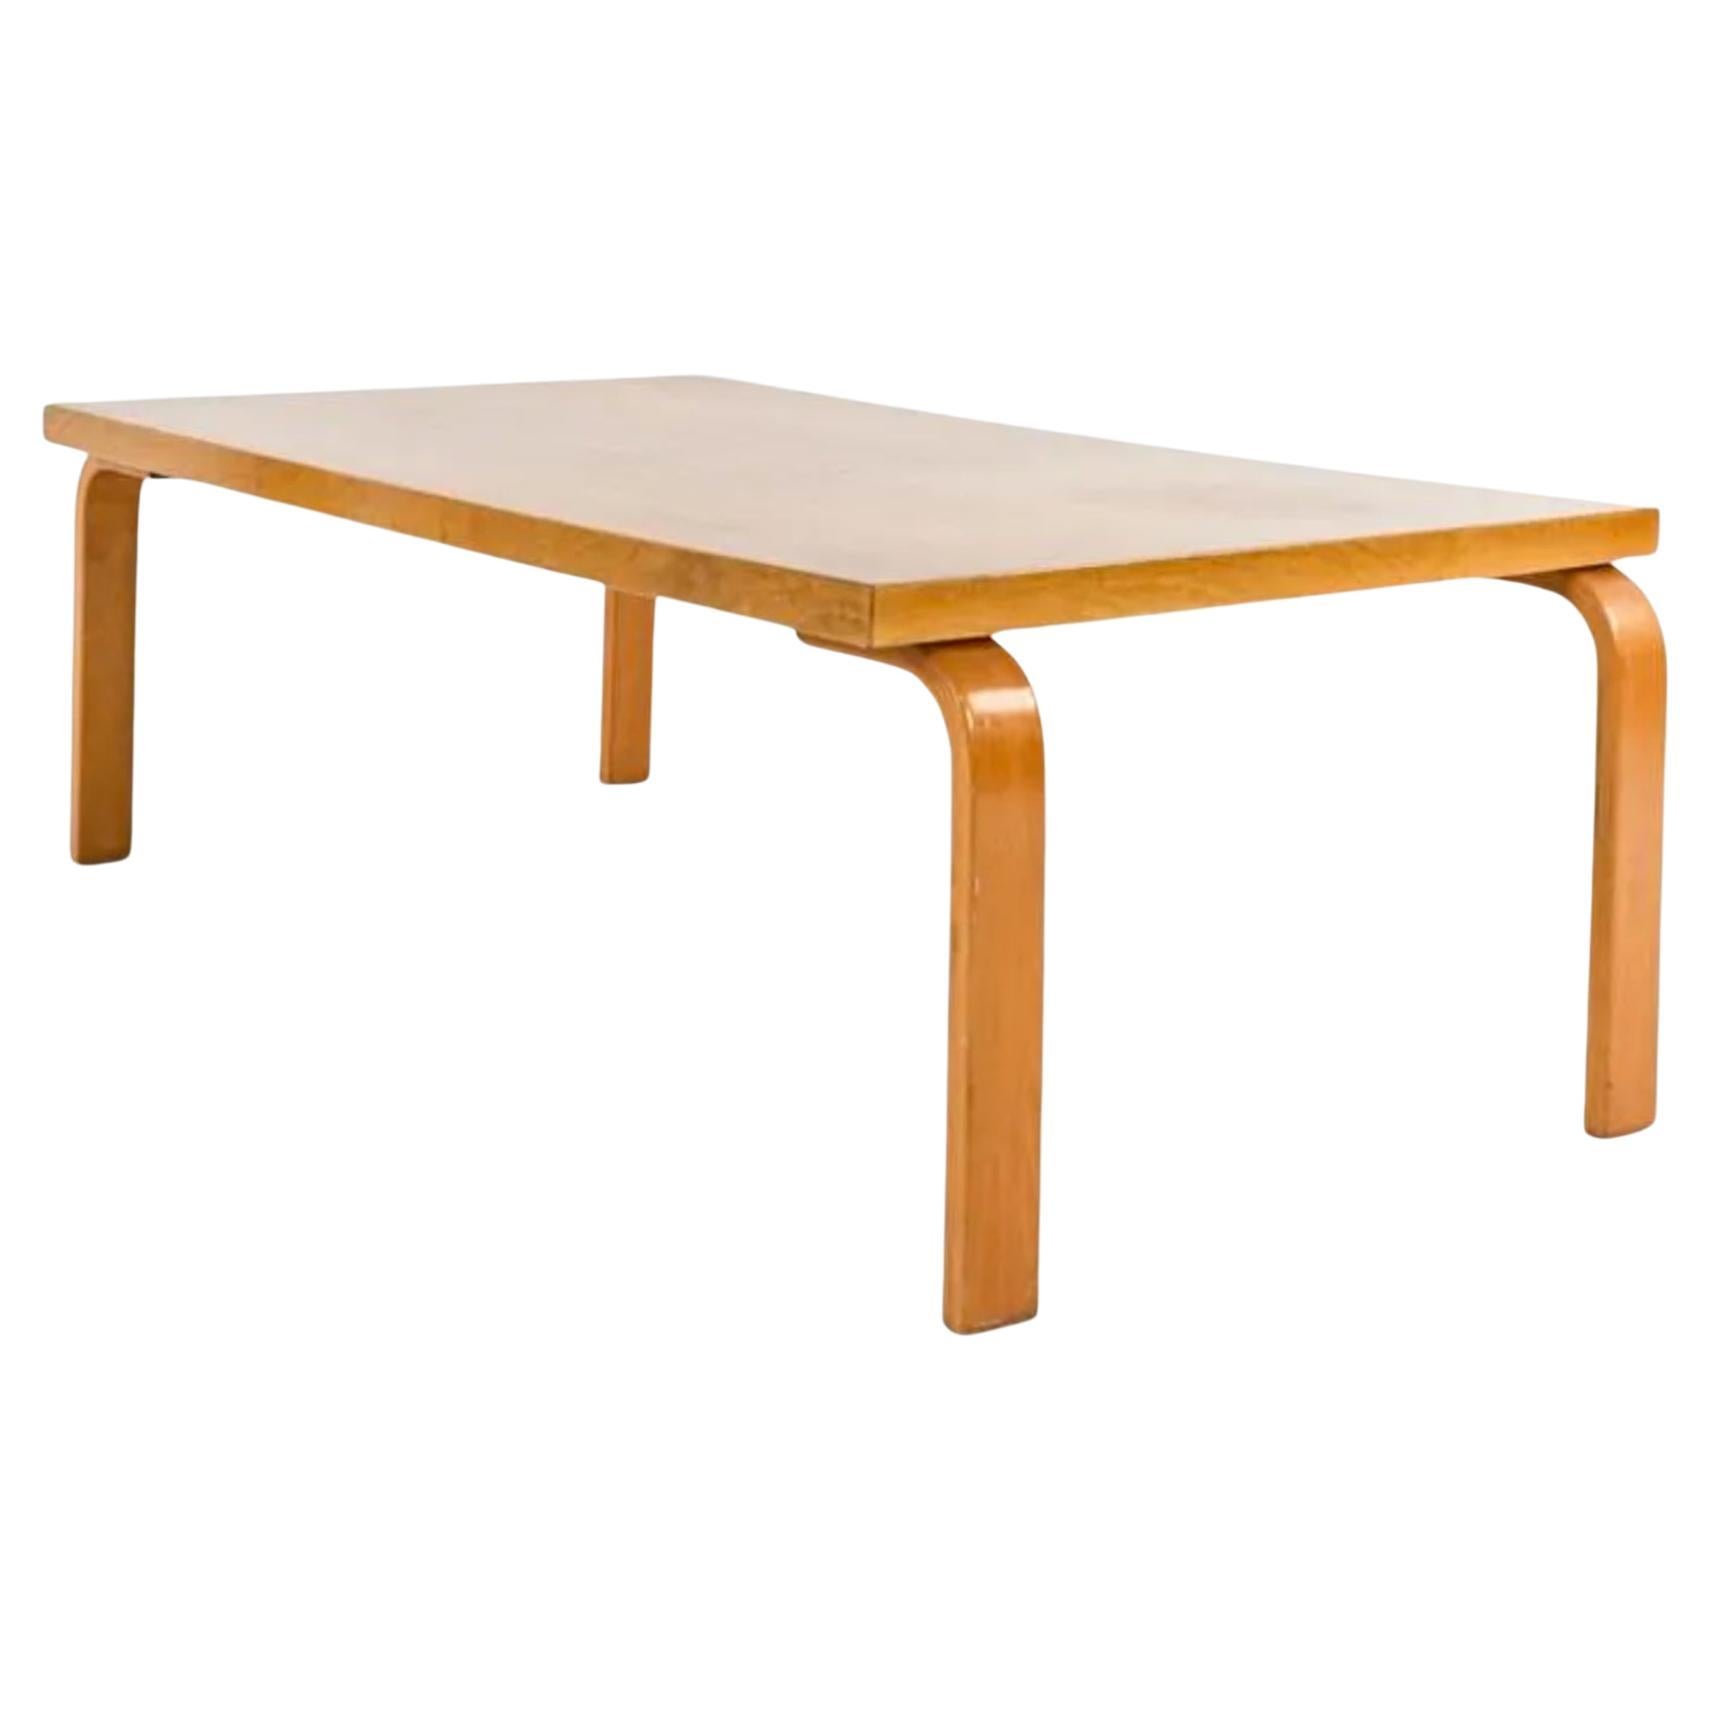 Midcentury coffee or cocktail table or Bench by Finnish architect and designer Alvar Allto. Stands on 4 birch bentwood legs and table top surface rectangle shape all in a blonde finish. Assembled with flat head steel screws. In all original